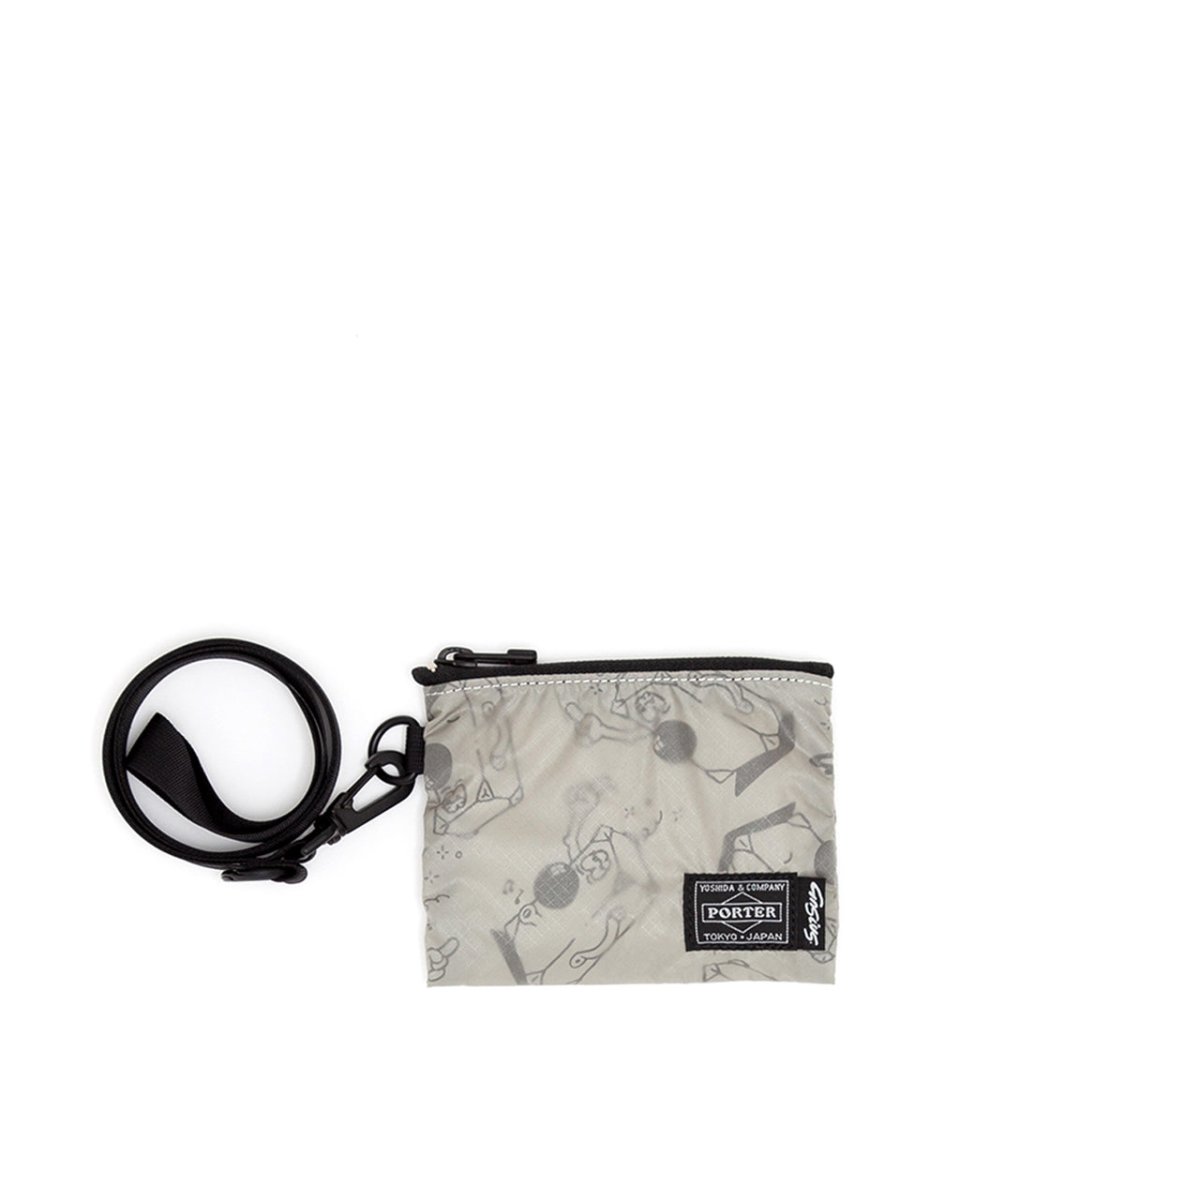 Porter by Yoshida x Gasius Pouch and Strap (Grau)  - Allike Store